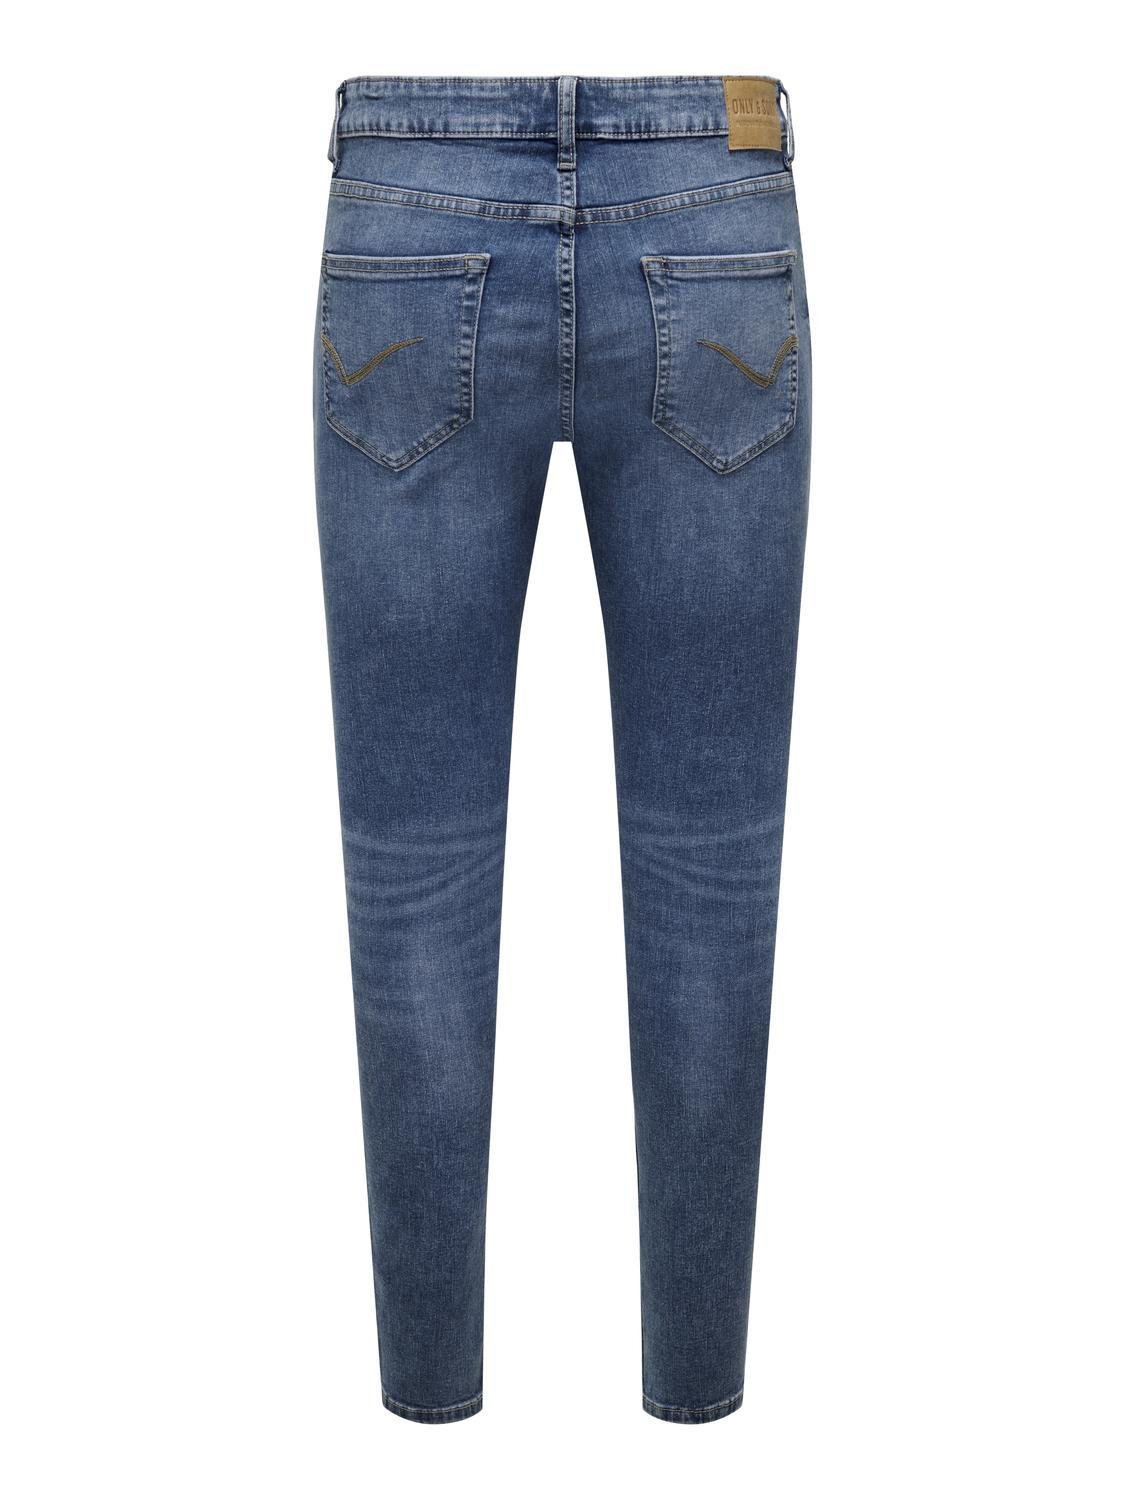 ONLY & SONS Jeans Spray on Fit Taille moyenne -Medium Blue Denim - 22027848